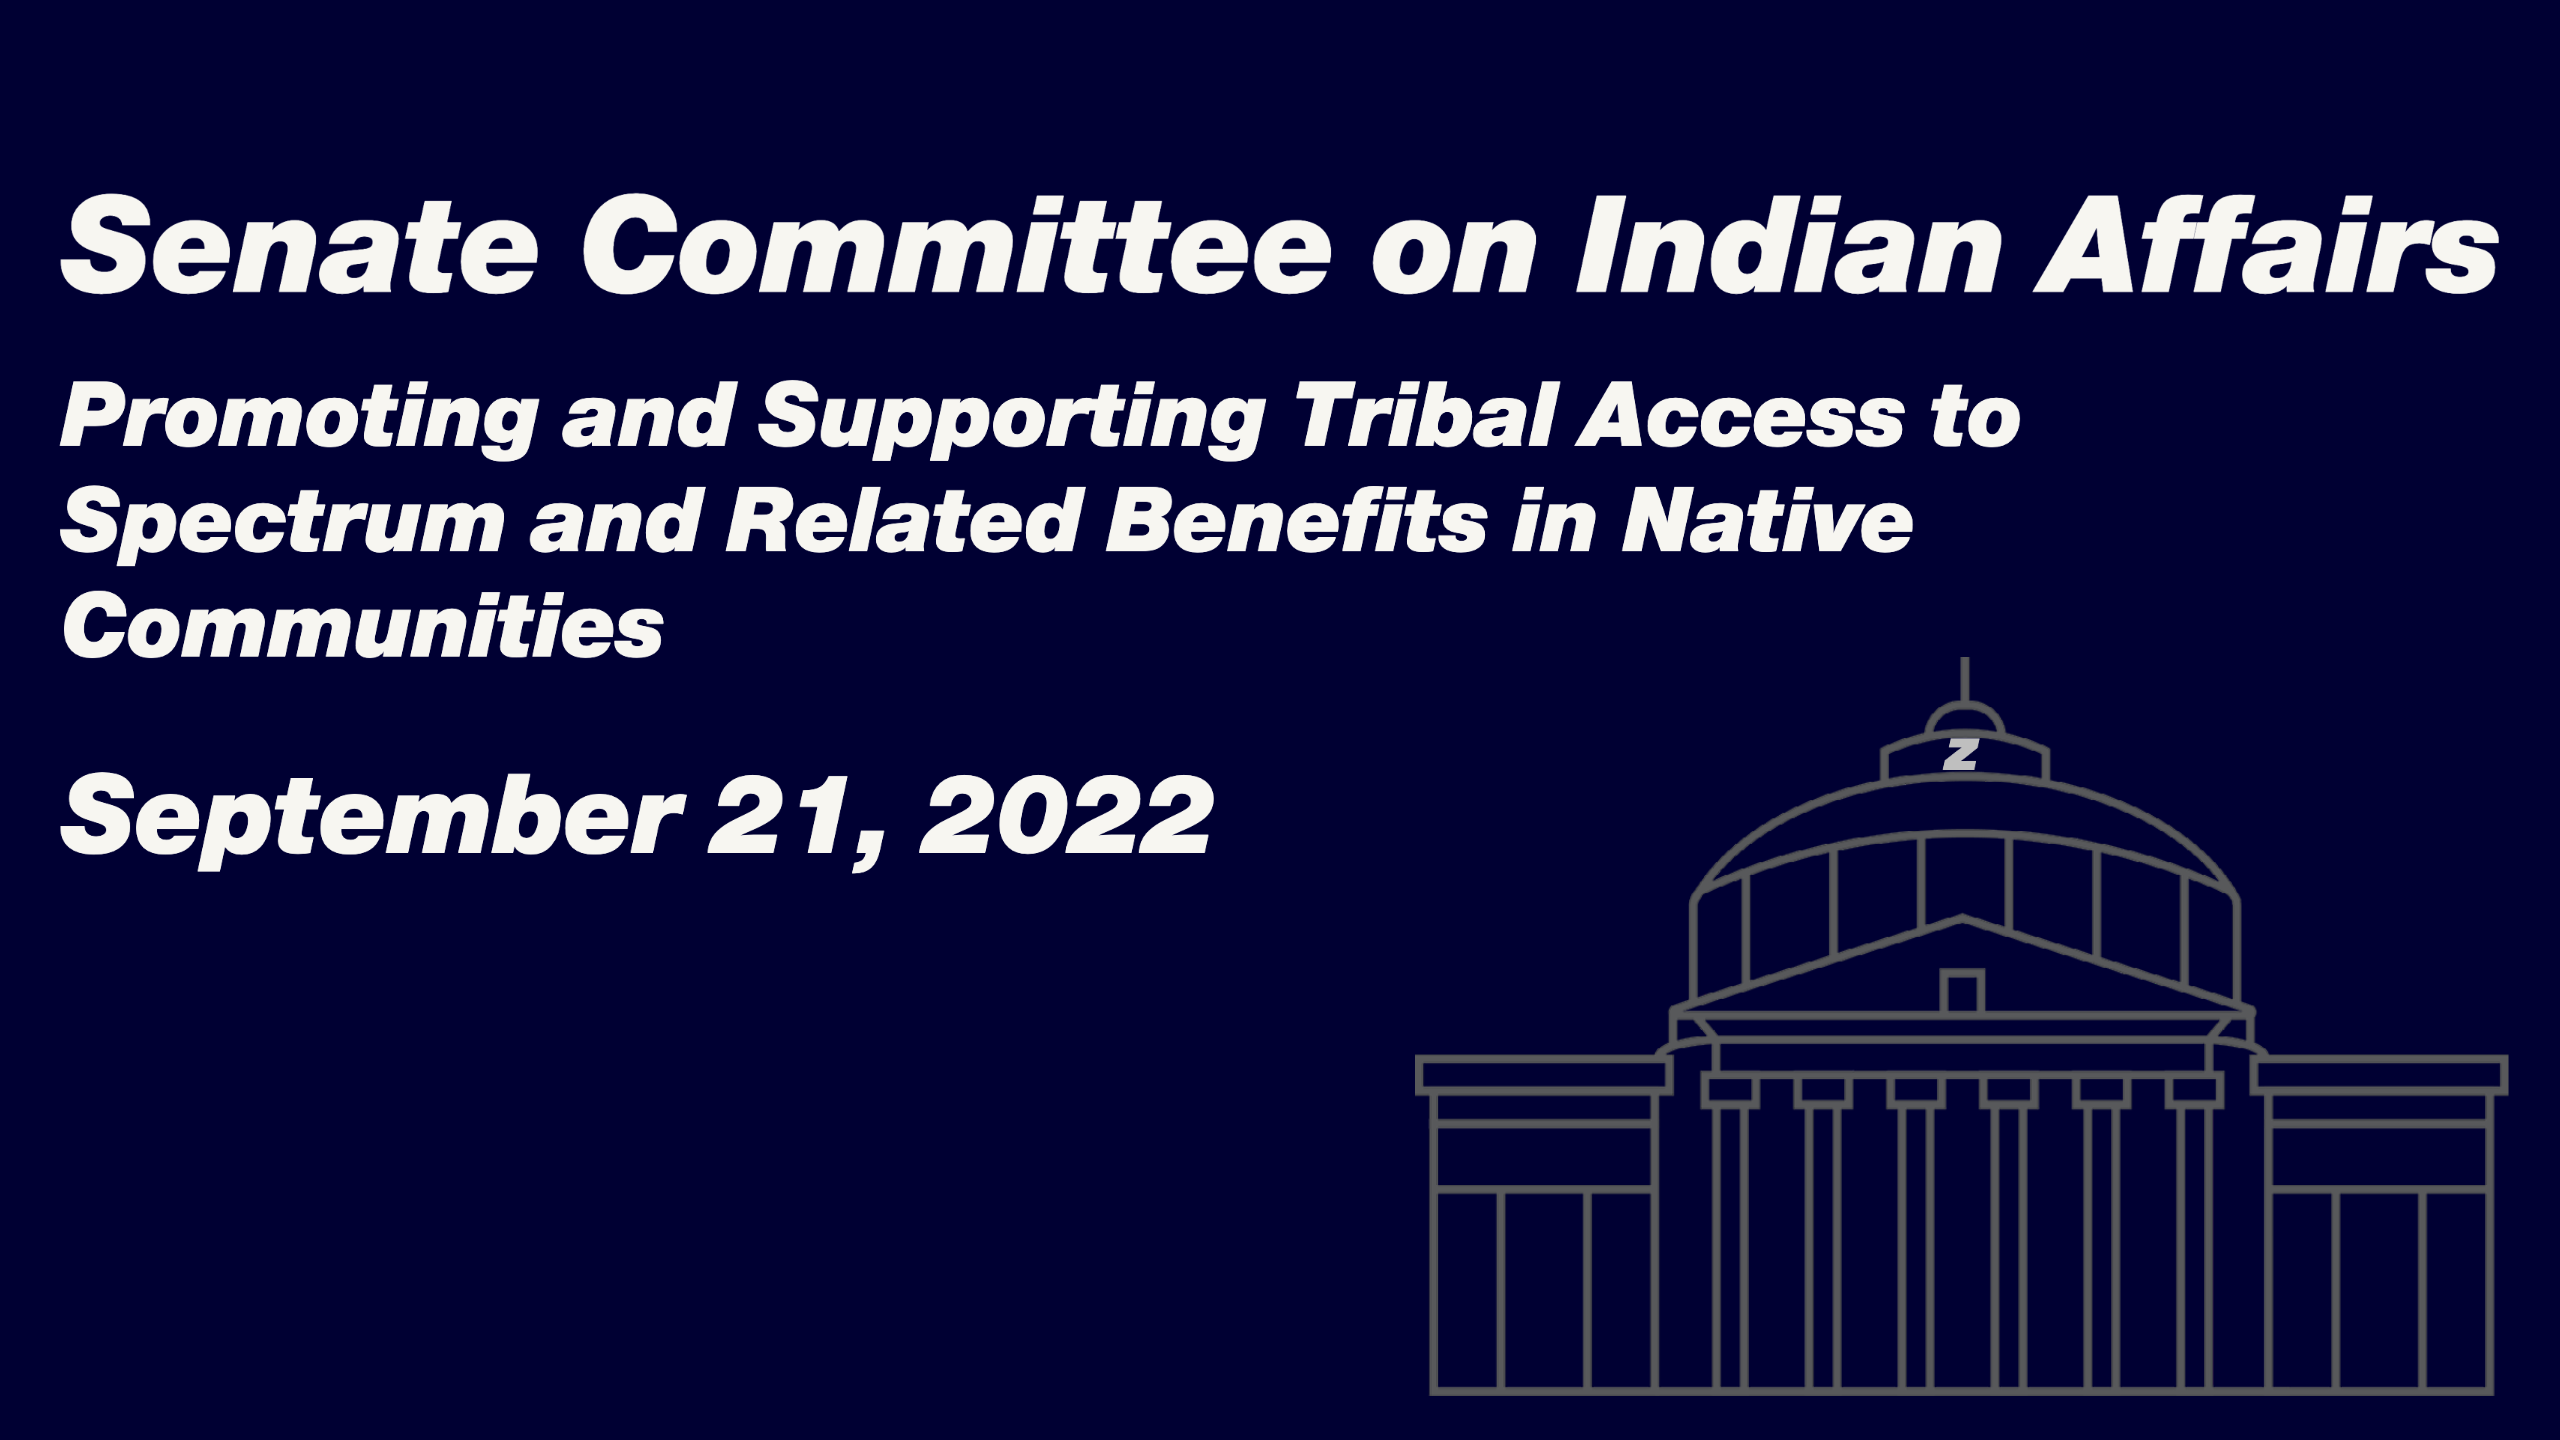 Senate Committee on Indian Affairs Roundtable discussion titled “Promoting and Supporting Tribal Access to Spectrum and Related Benefits in Native Communities"